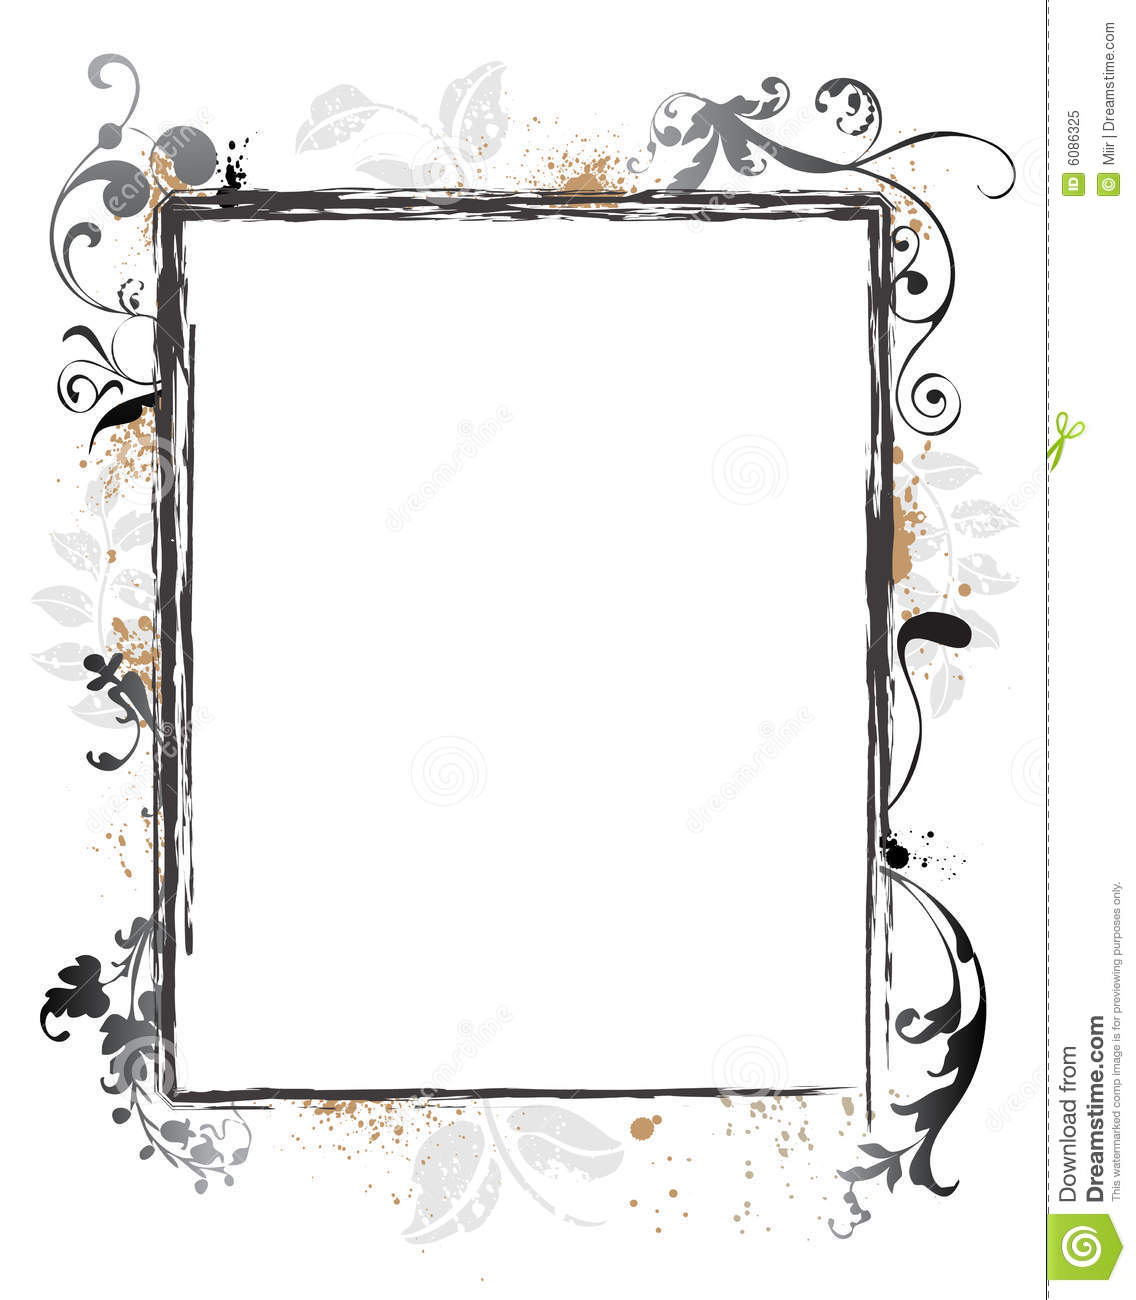 Free Wedding Borders and Frames